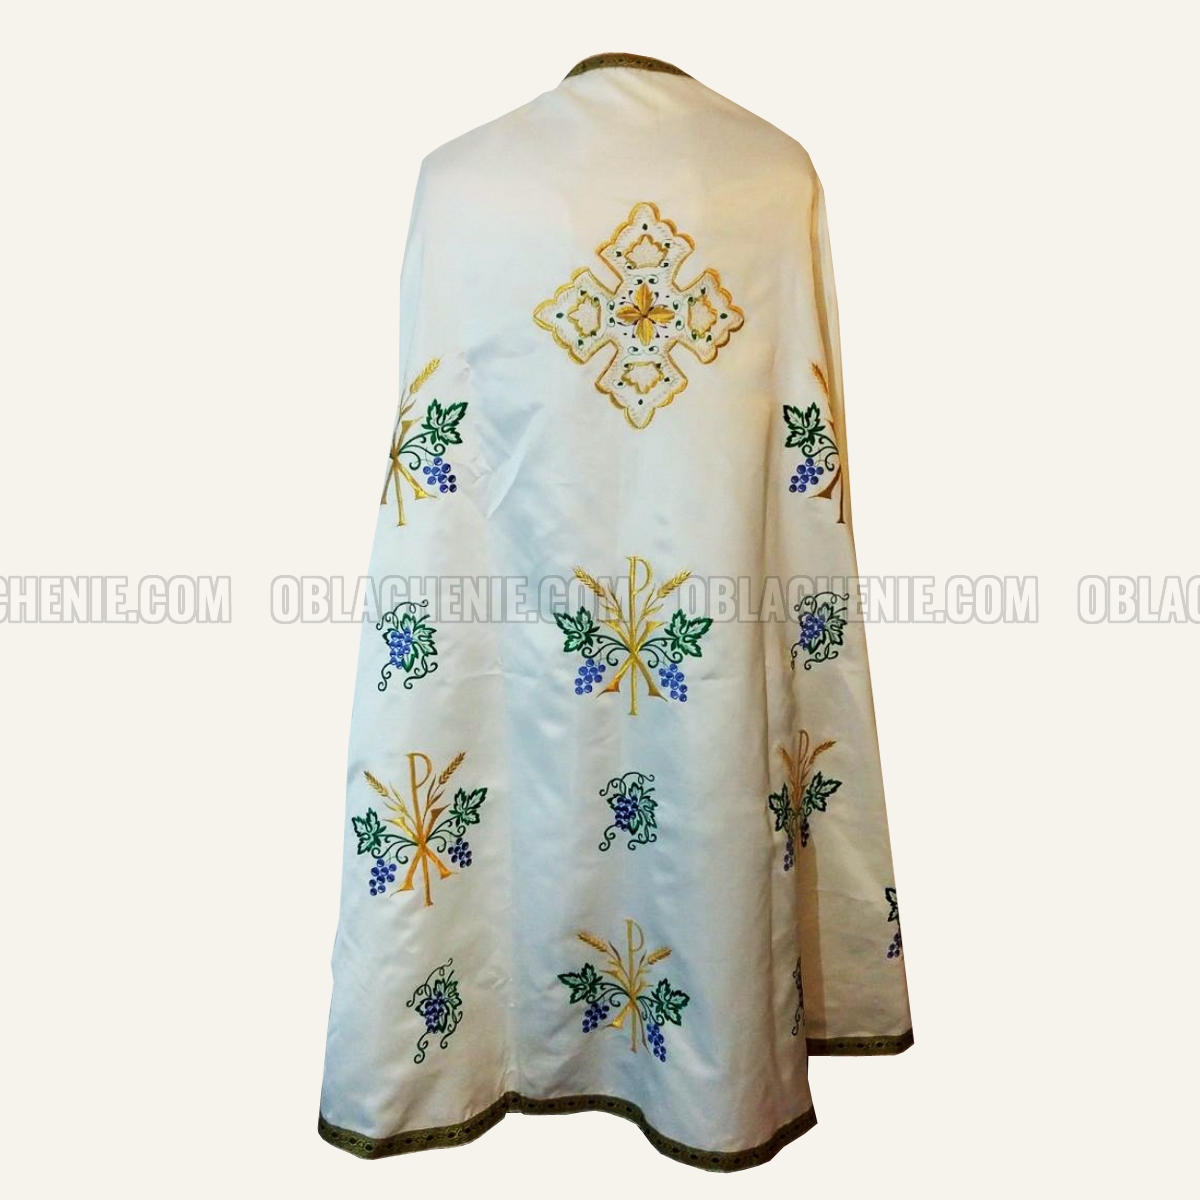 Embroidered priest's vestments 10260